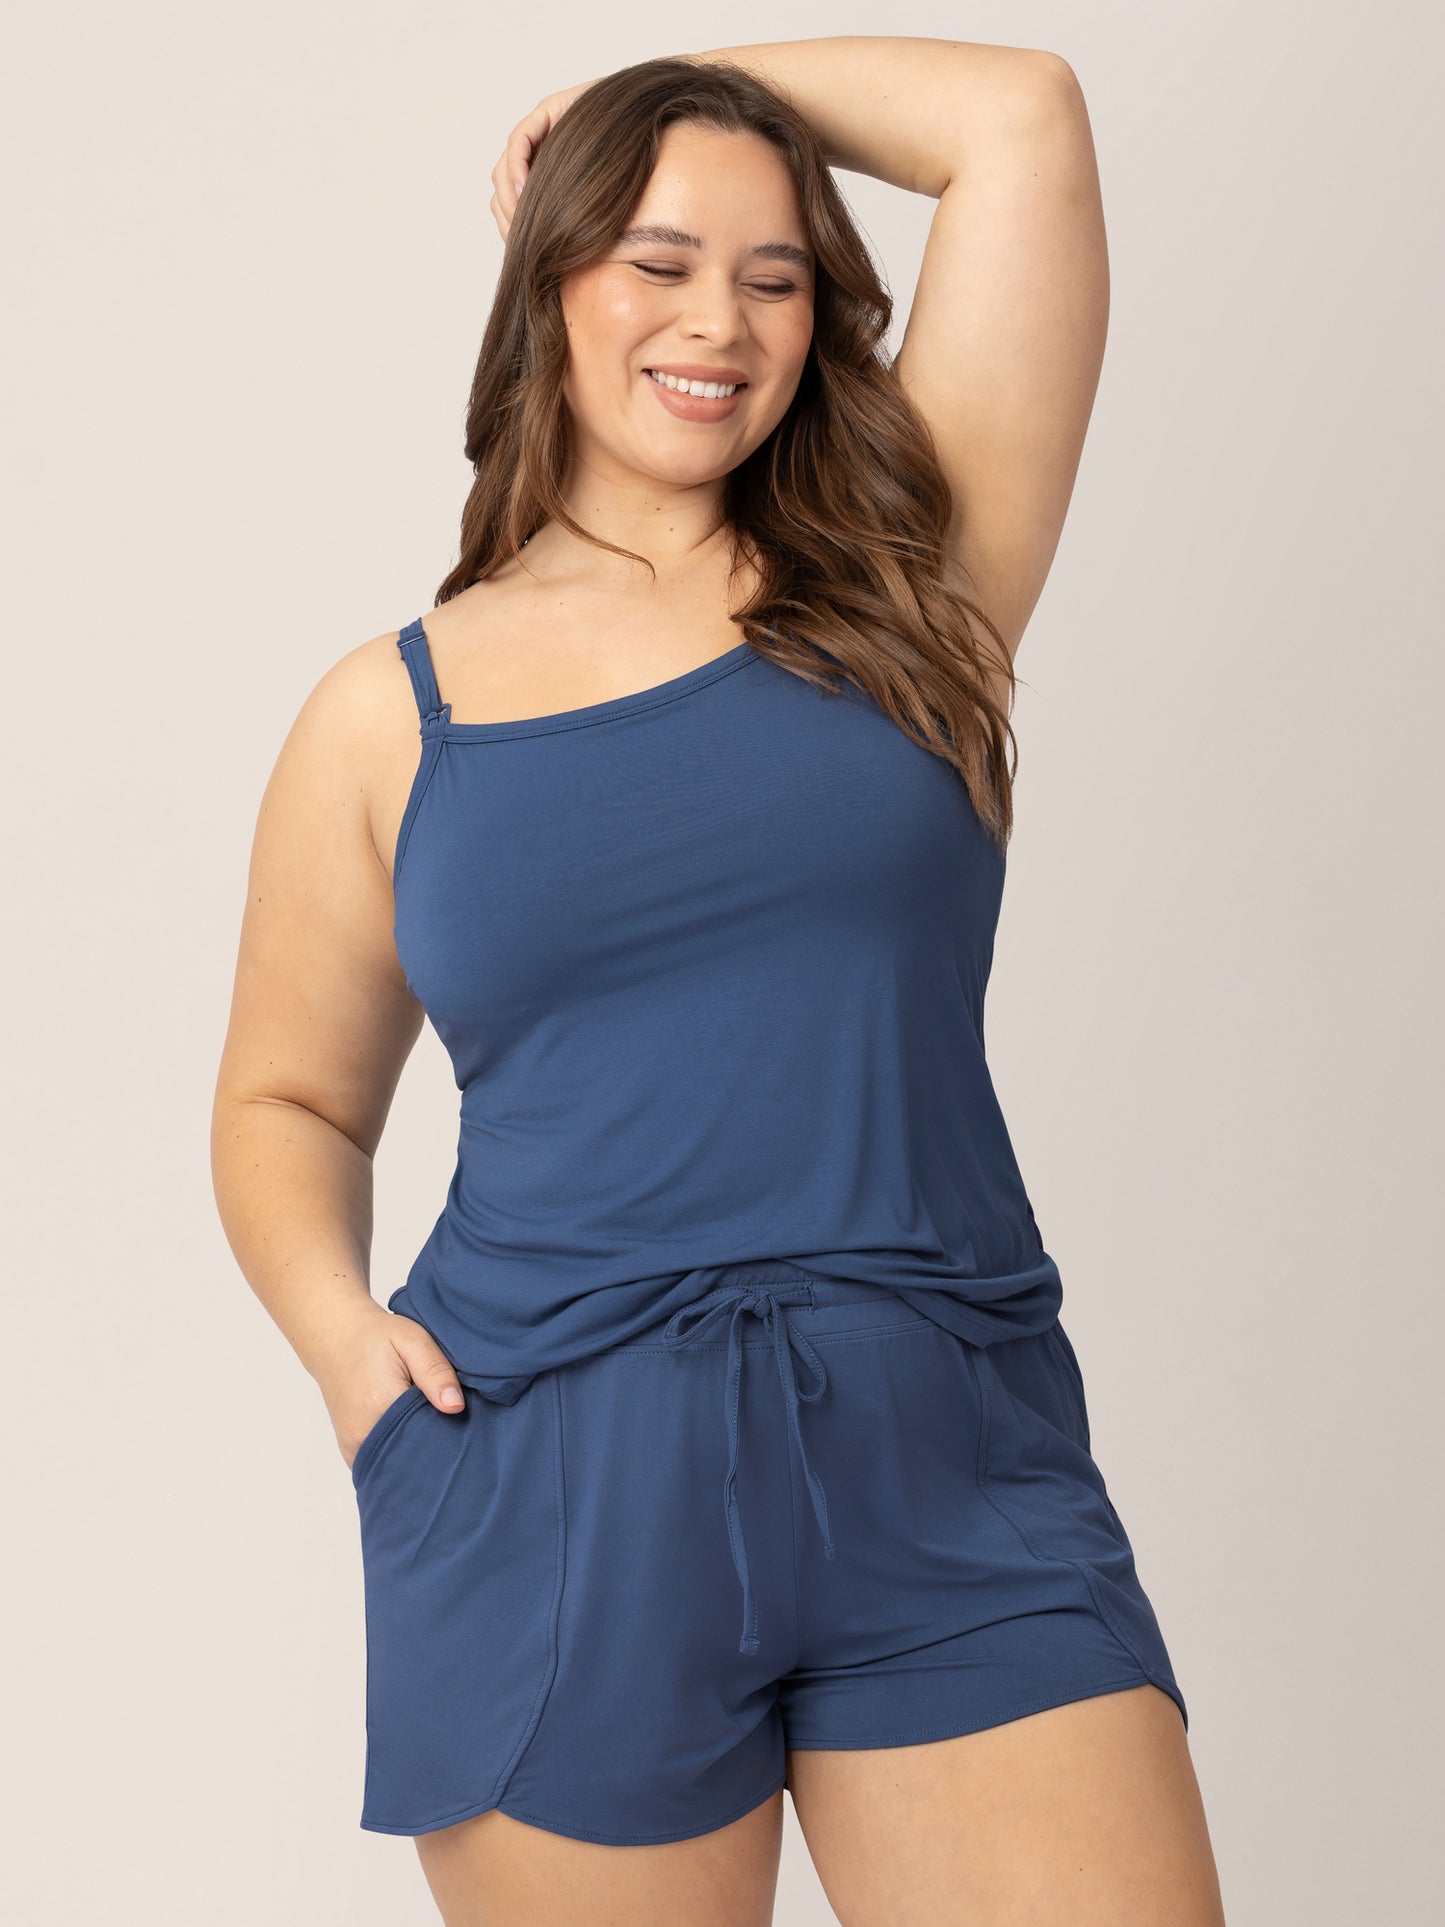 Model with her hand on top of her head wearing the Bamboo Lounge Around Nursing Tank in Slate Blue.